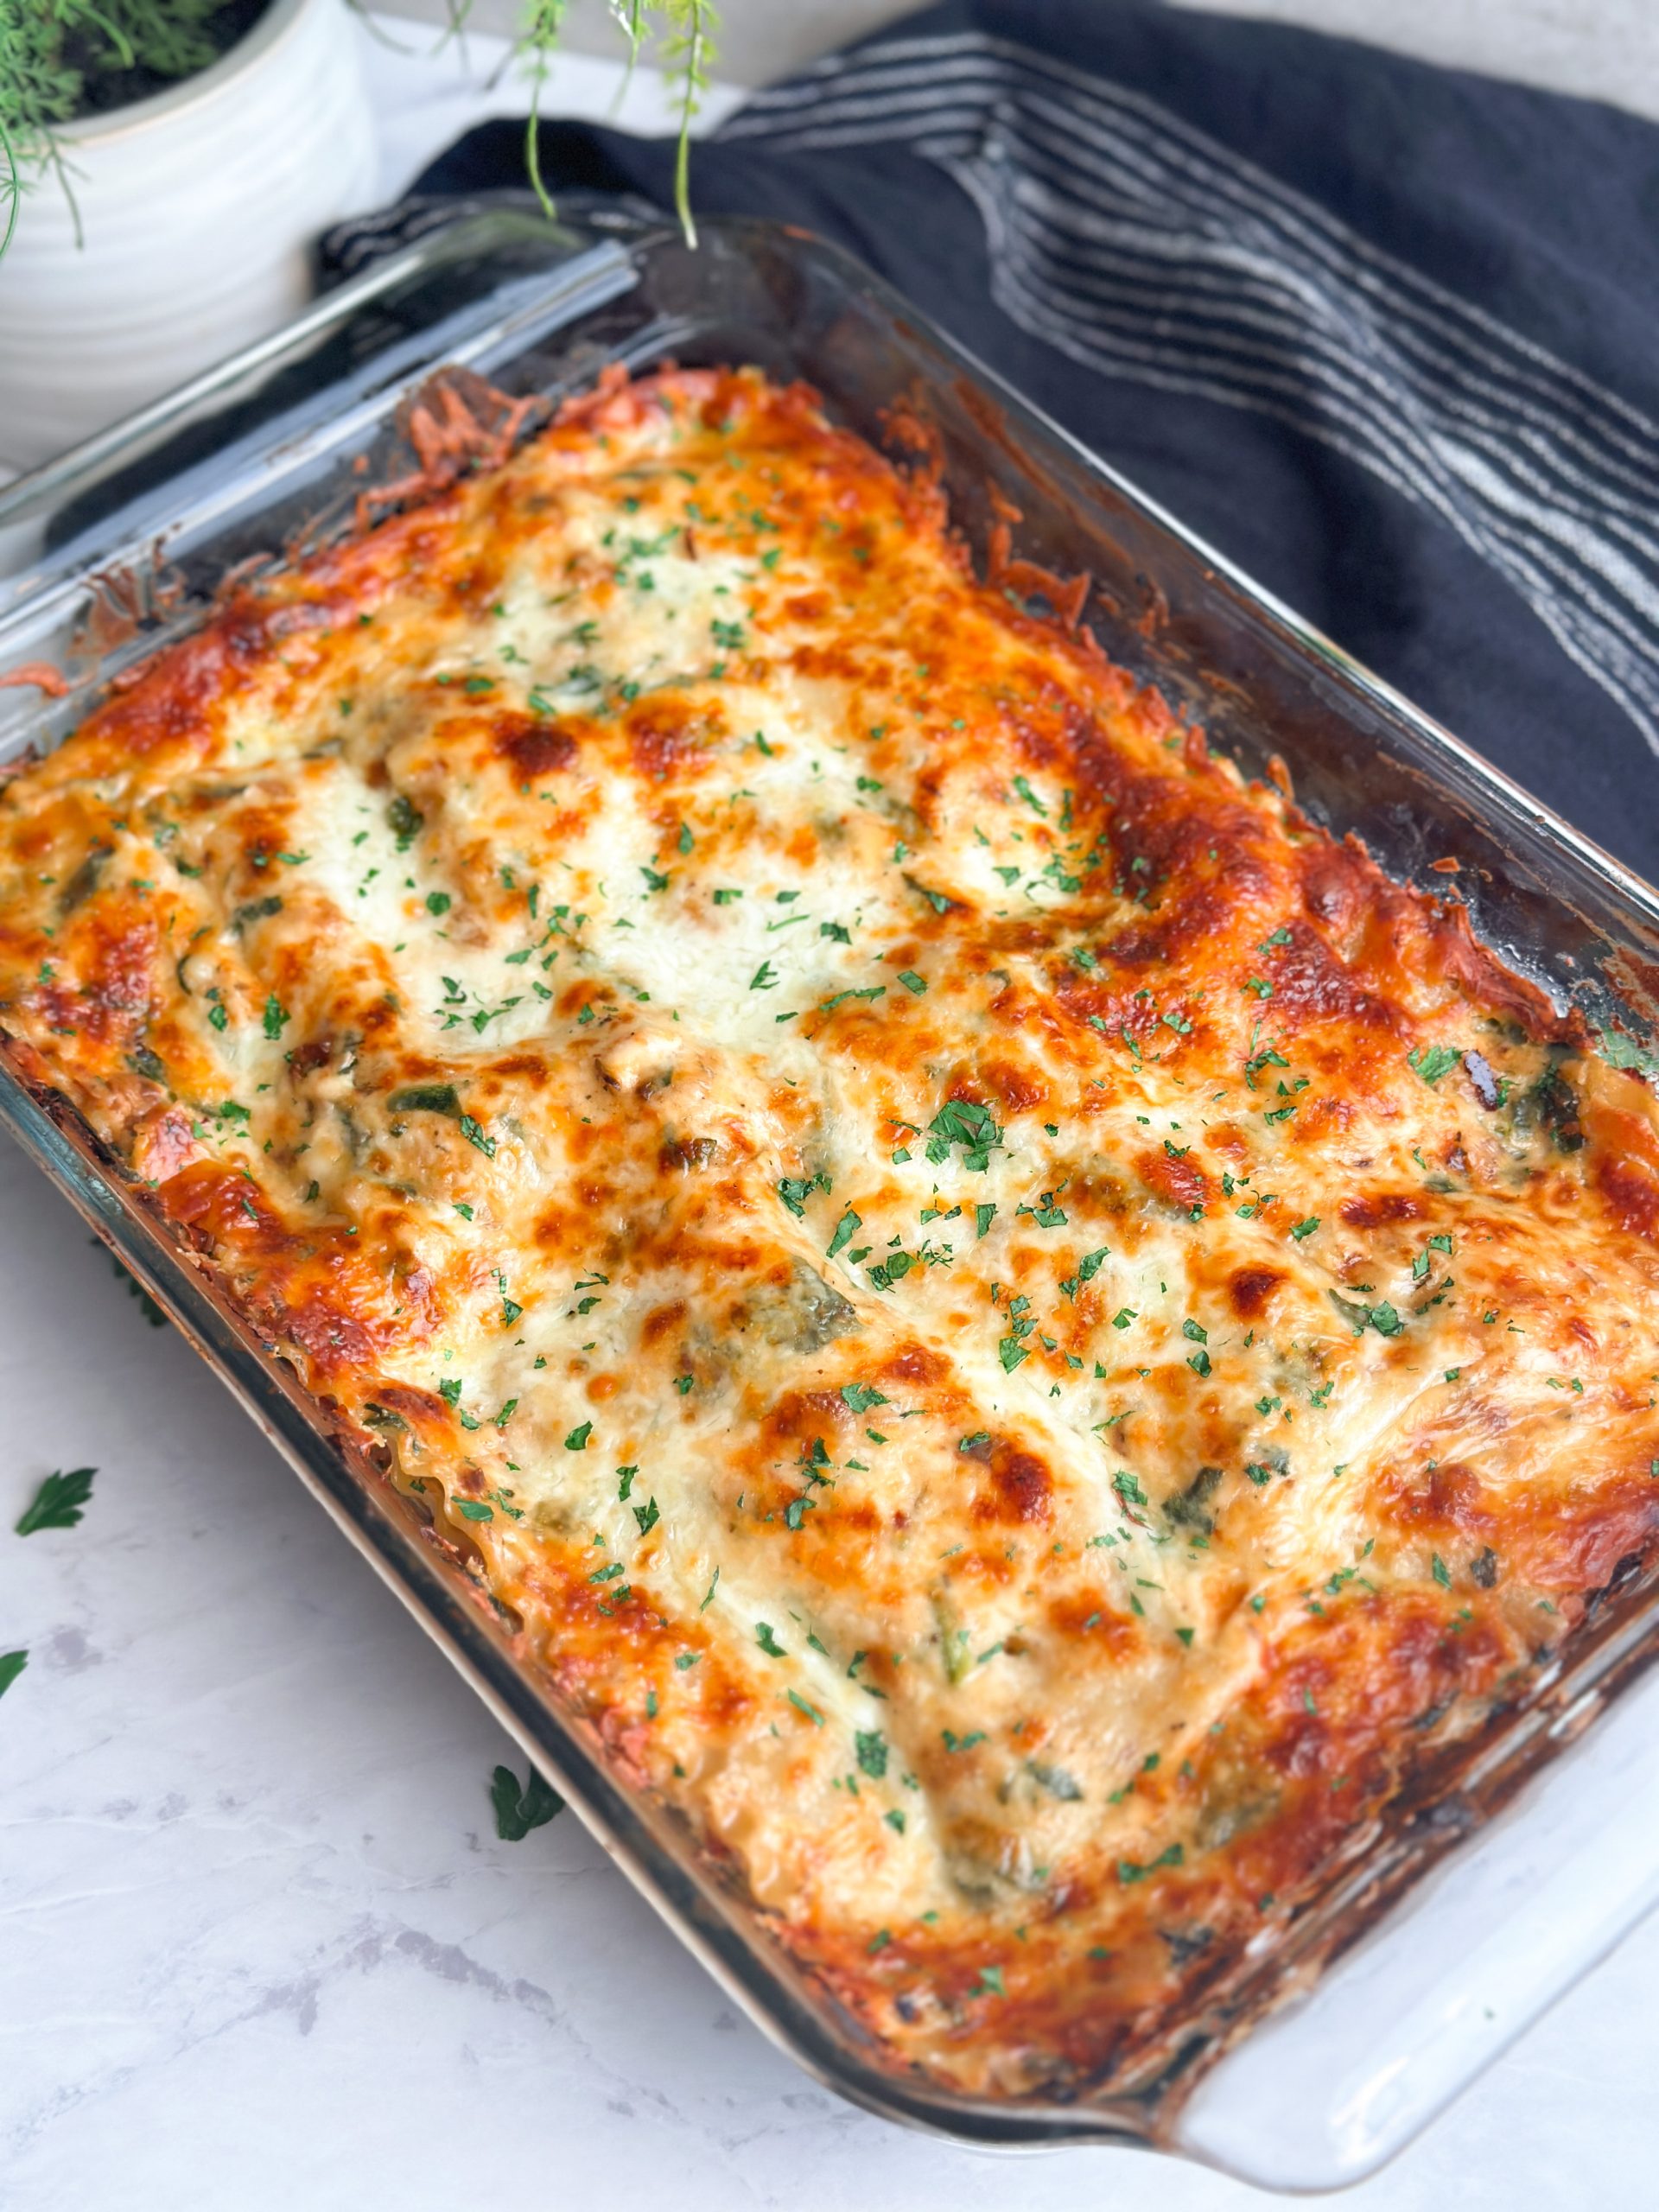 chicken alfredo lasagna baked in a glass dish. lasagna has a golden crispy cheese layer on top. Black cloth in background.